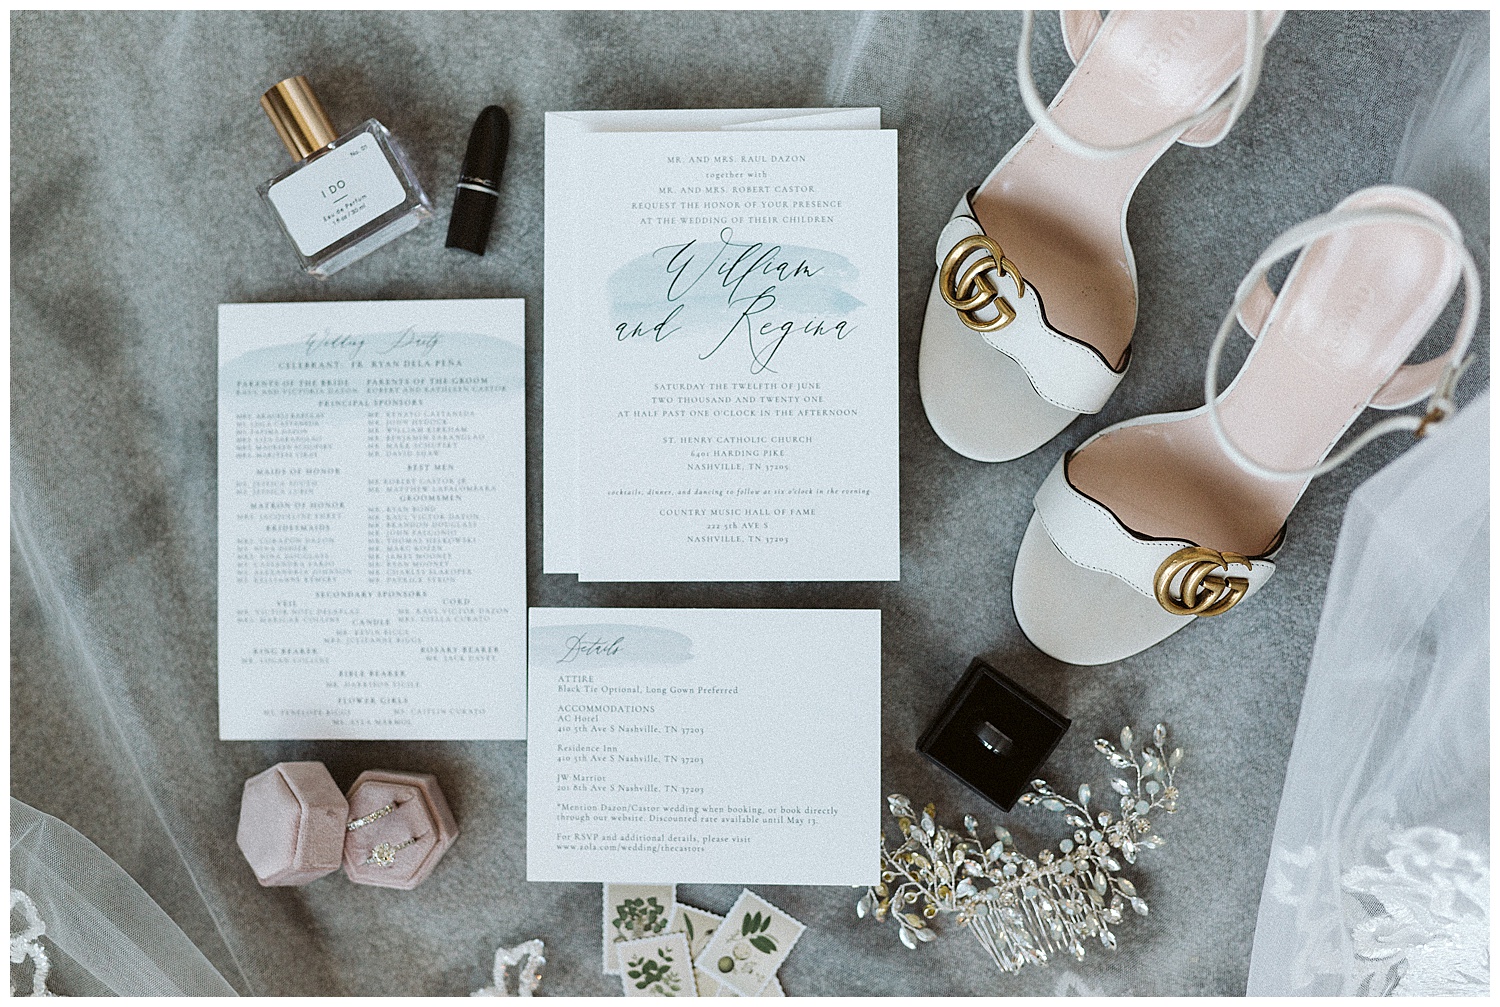 Gucci shoes, invite suite, Nashville wedding photography, Country Music Hall of Fame wedding reception, Tennessee wedding Planning, Wedding Inspiration, Engagement Inspiration, Downtown Nashville